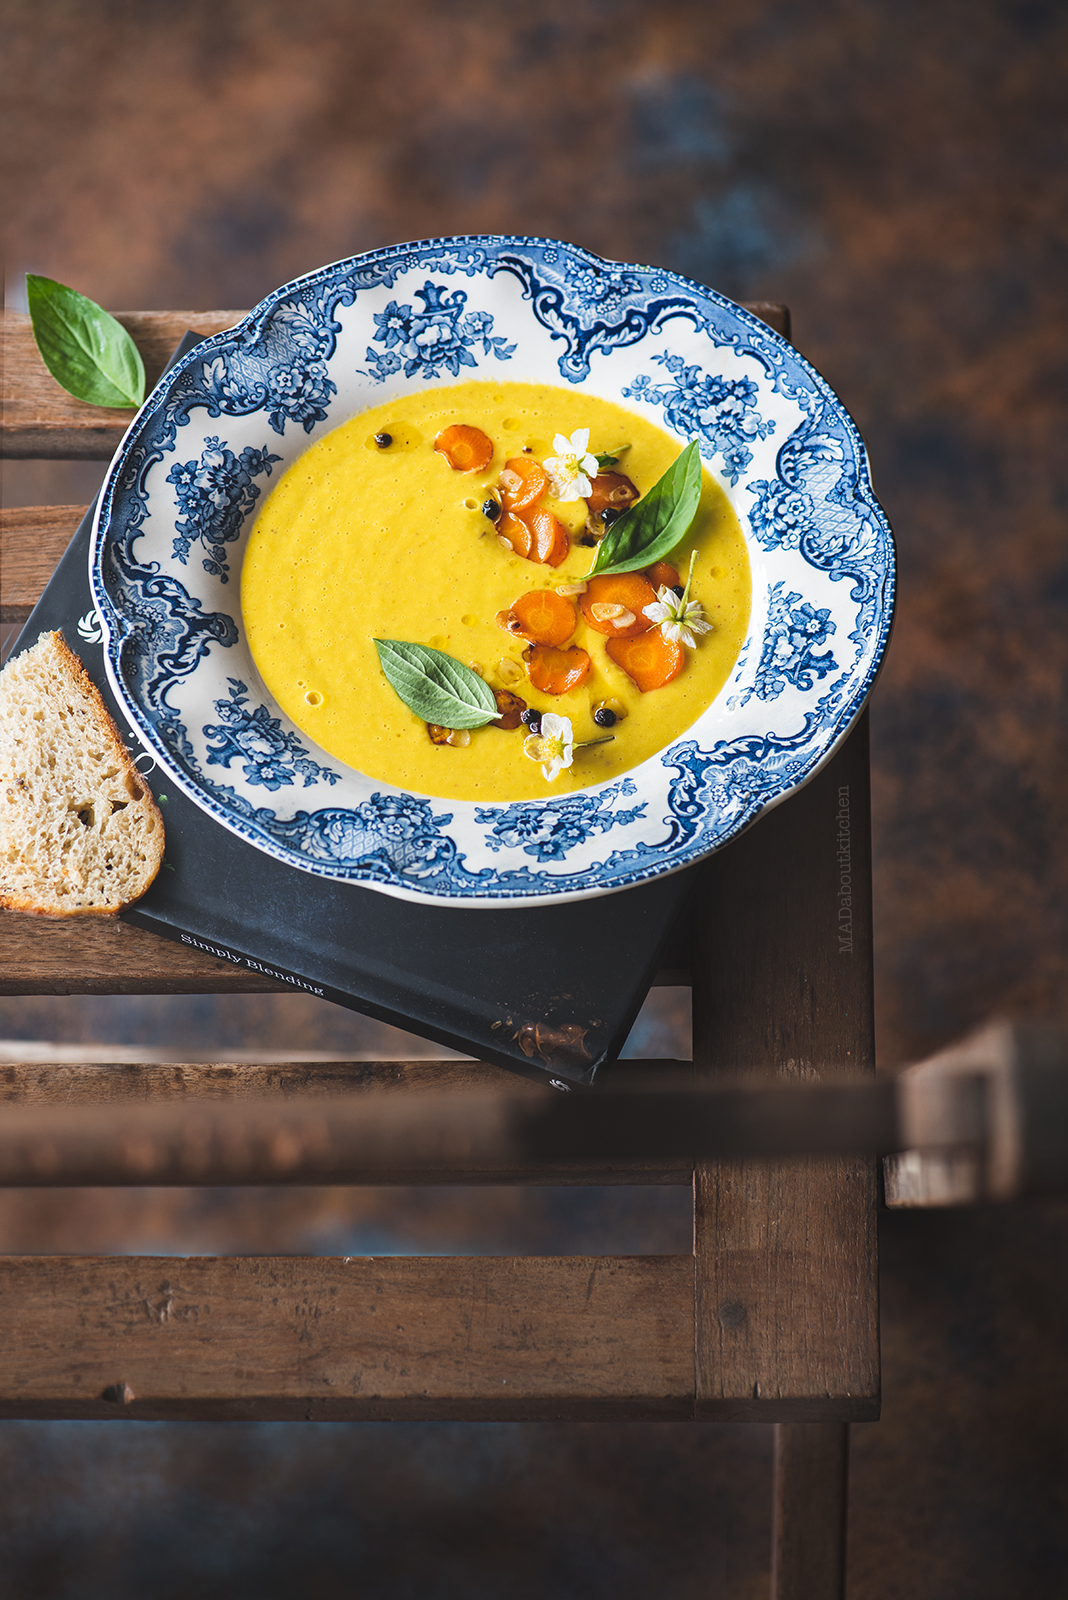 Carrot Corn Soup is a perfect winter soup. Carrot & Corn gives a beautiful colour to the soup. It is creamy, light & filling when had with a slice of bread.